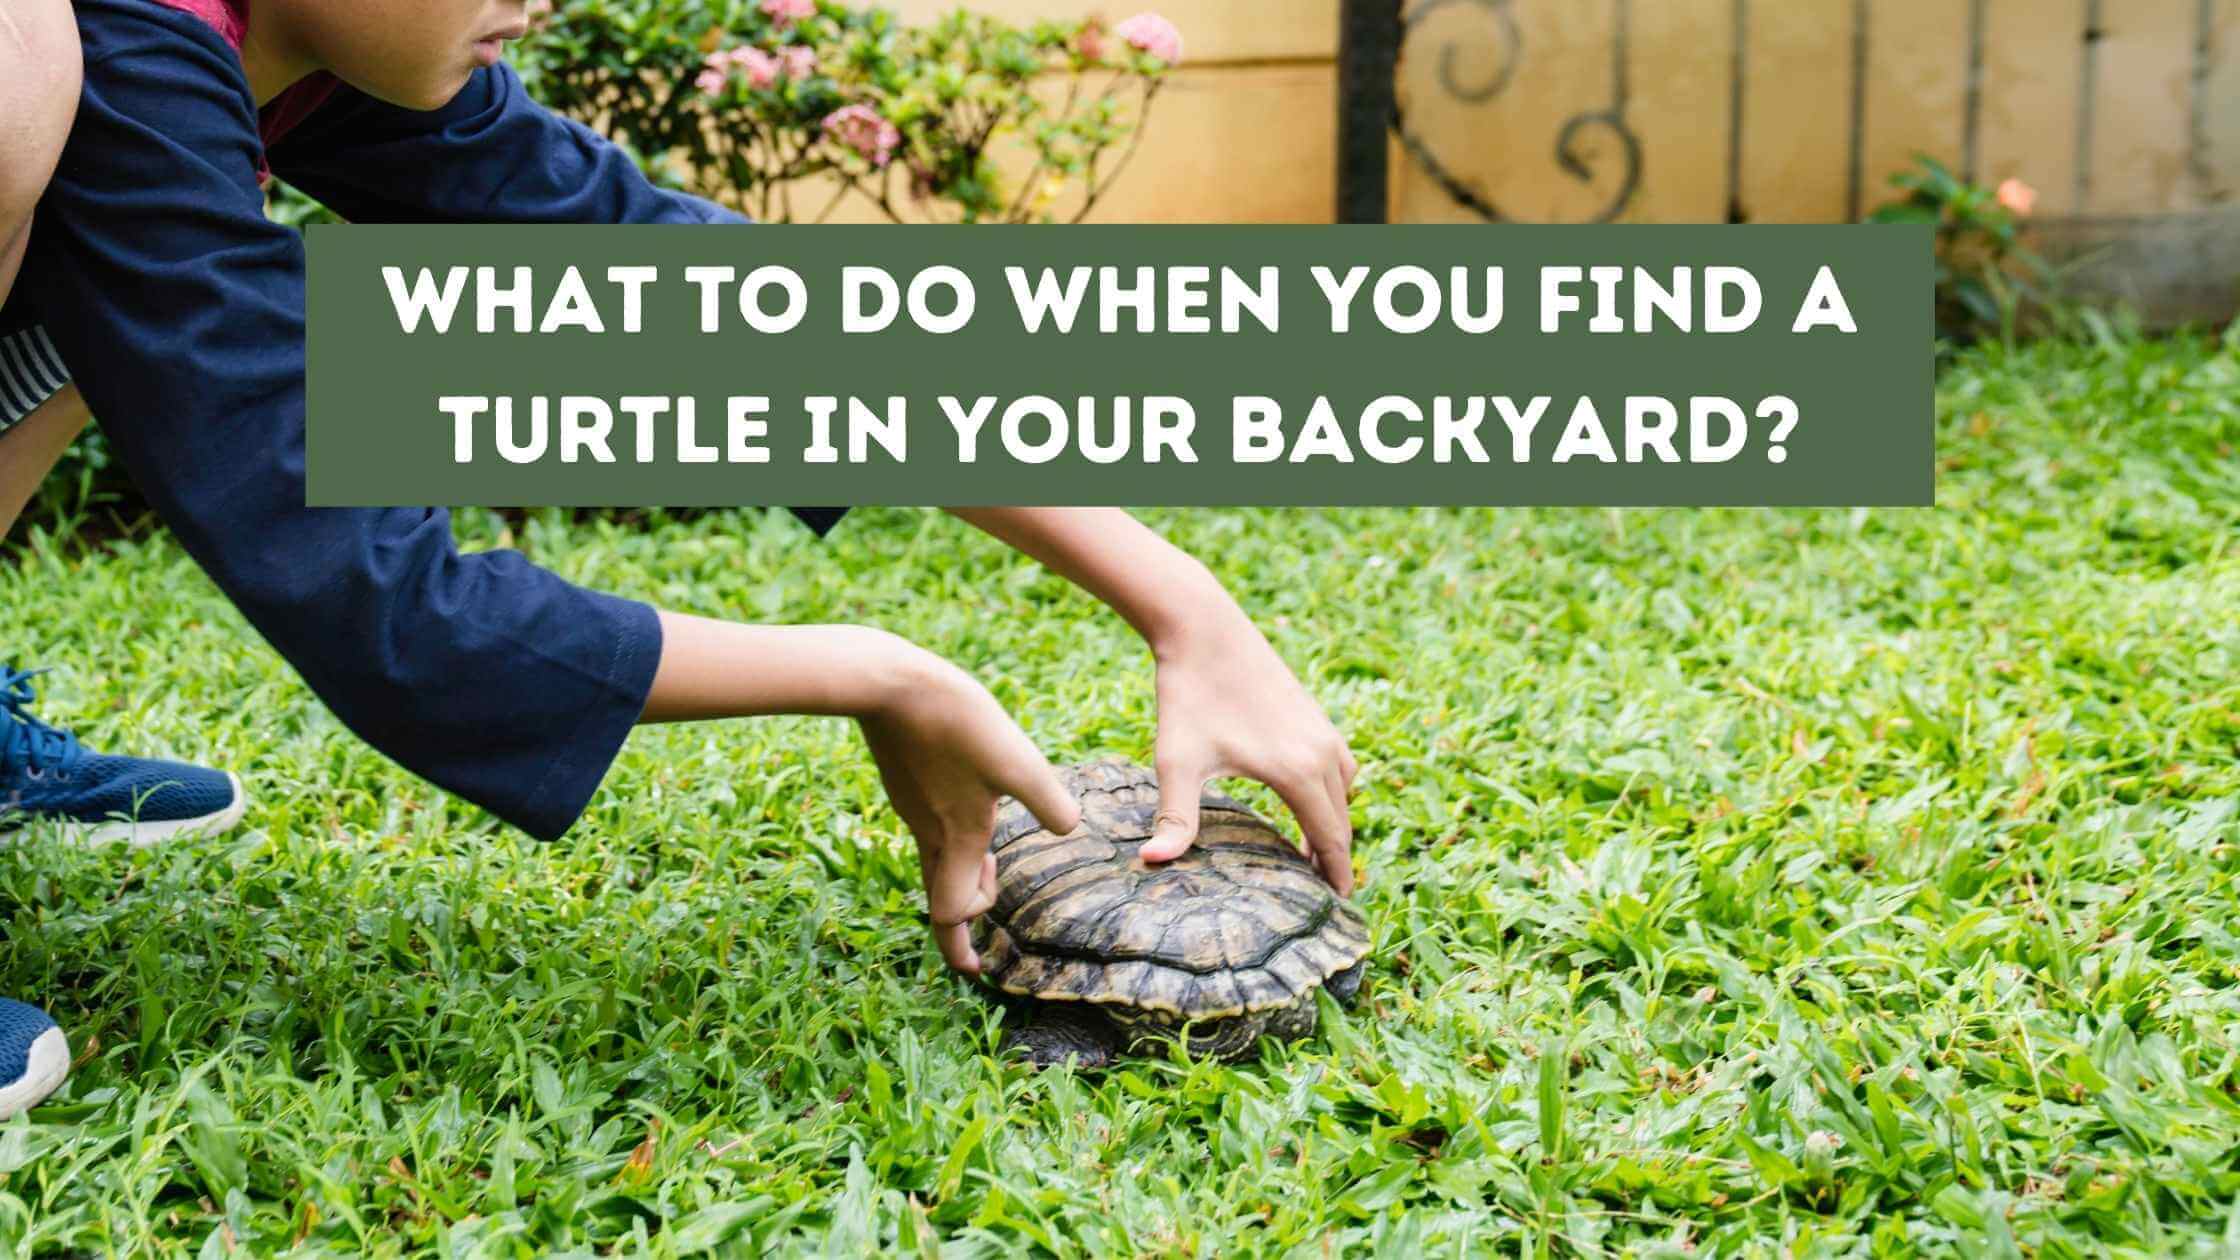 What to Do When You Find a Turtle in Your Backyard